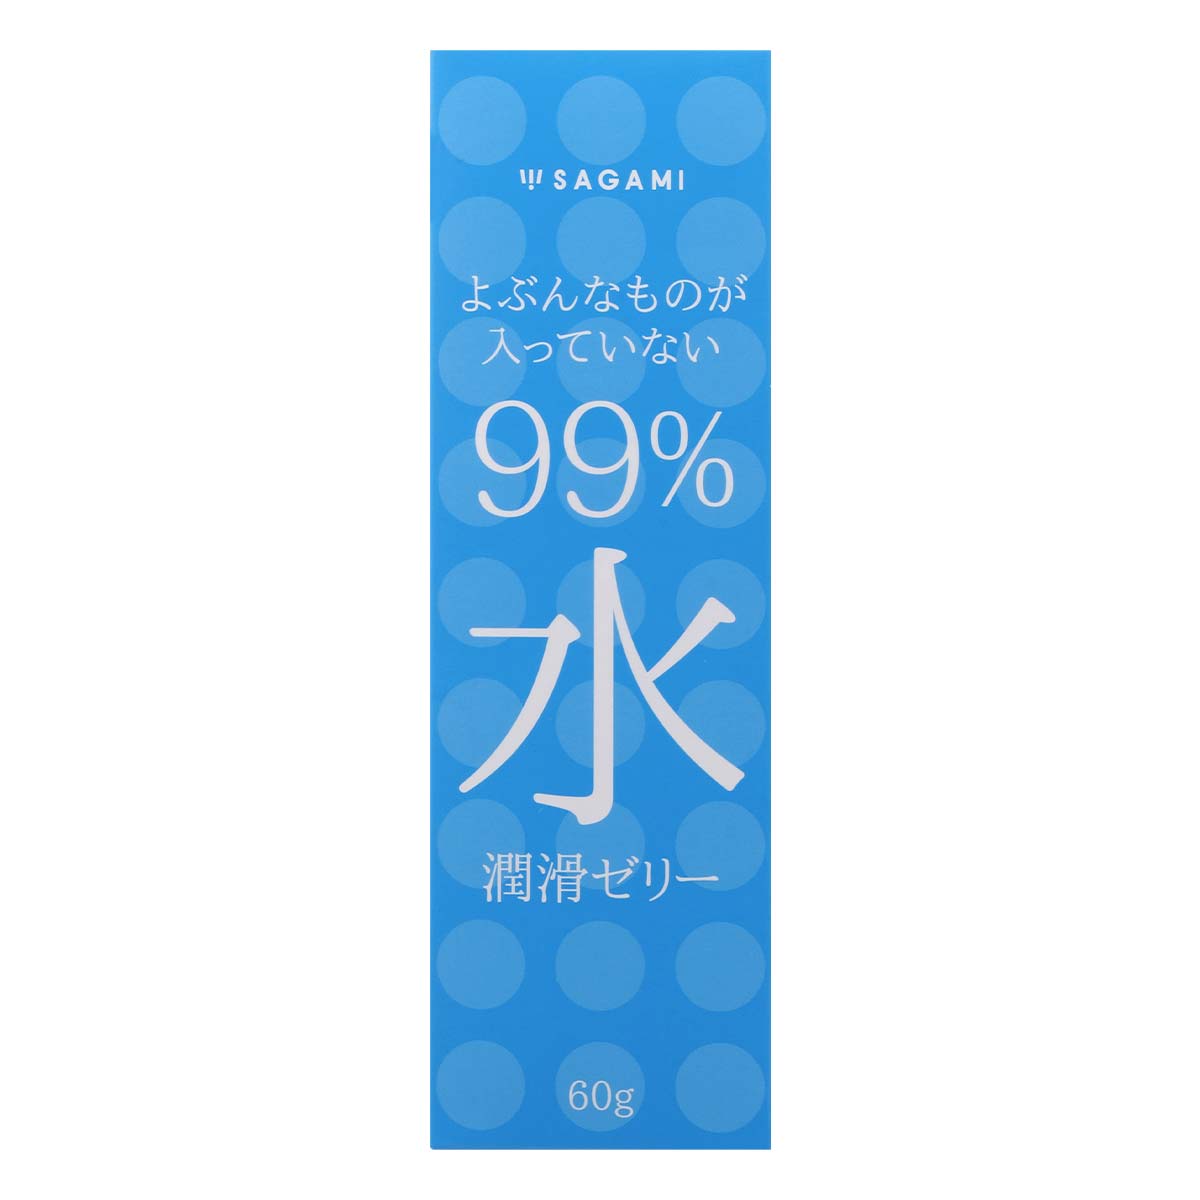 Sagami 99% Water Lubricating Jelly 60g Water-based Lubricant-p_2